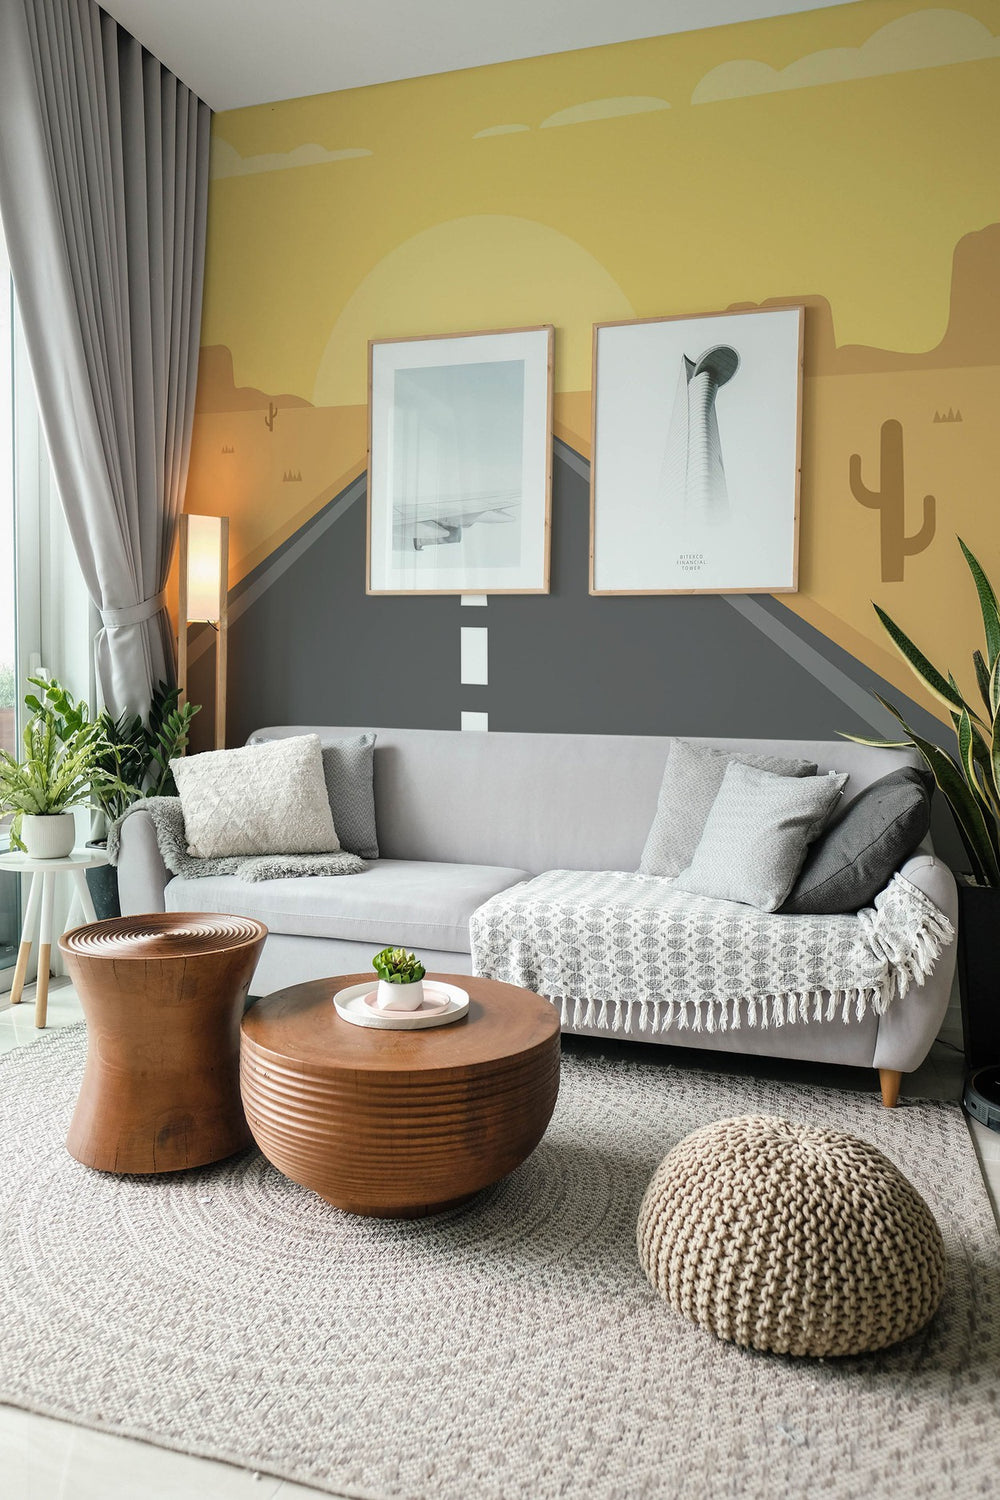 Contemporary living room interior with desert-themed wall mural, cozy grey sofa, and stylish wooden furniture